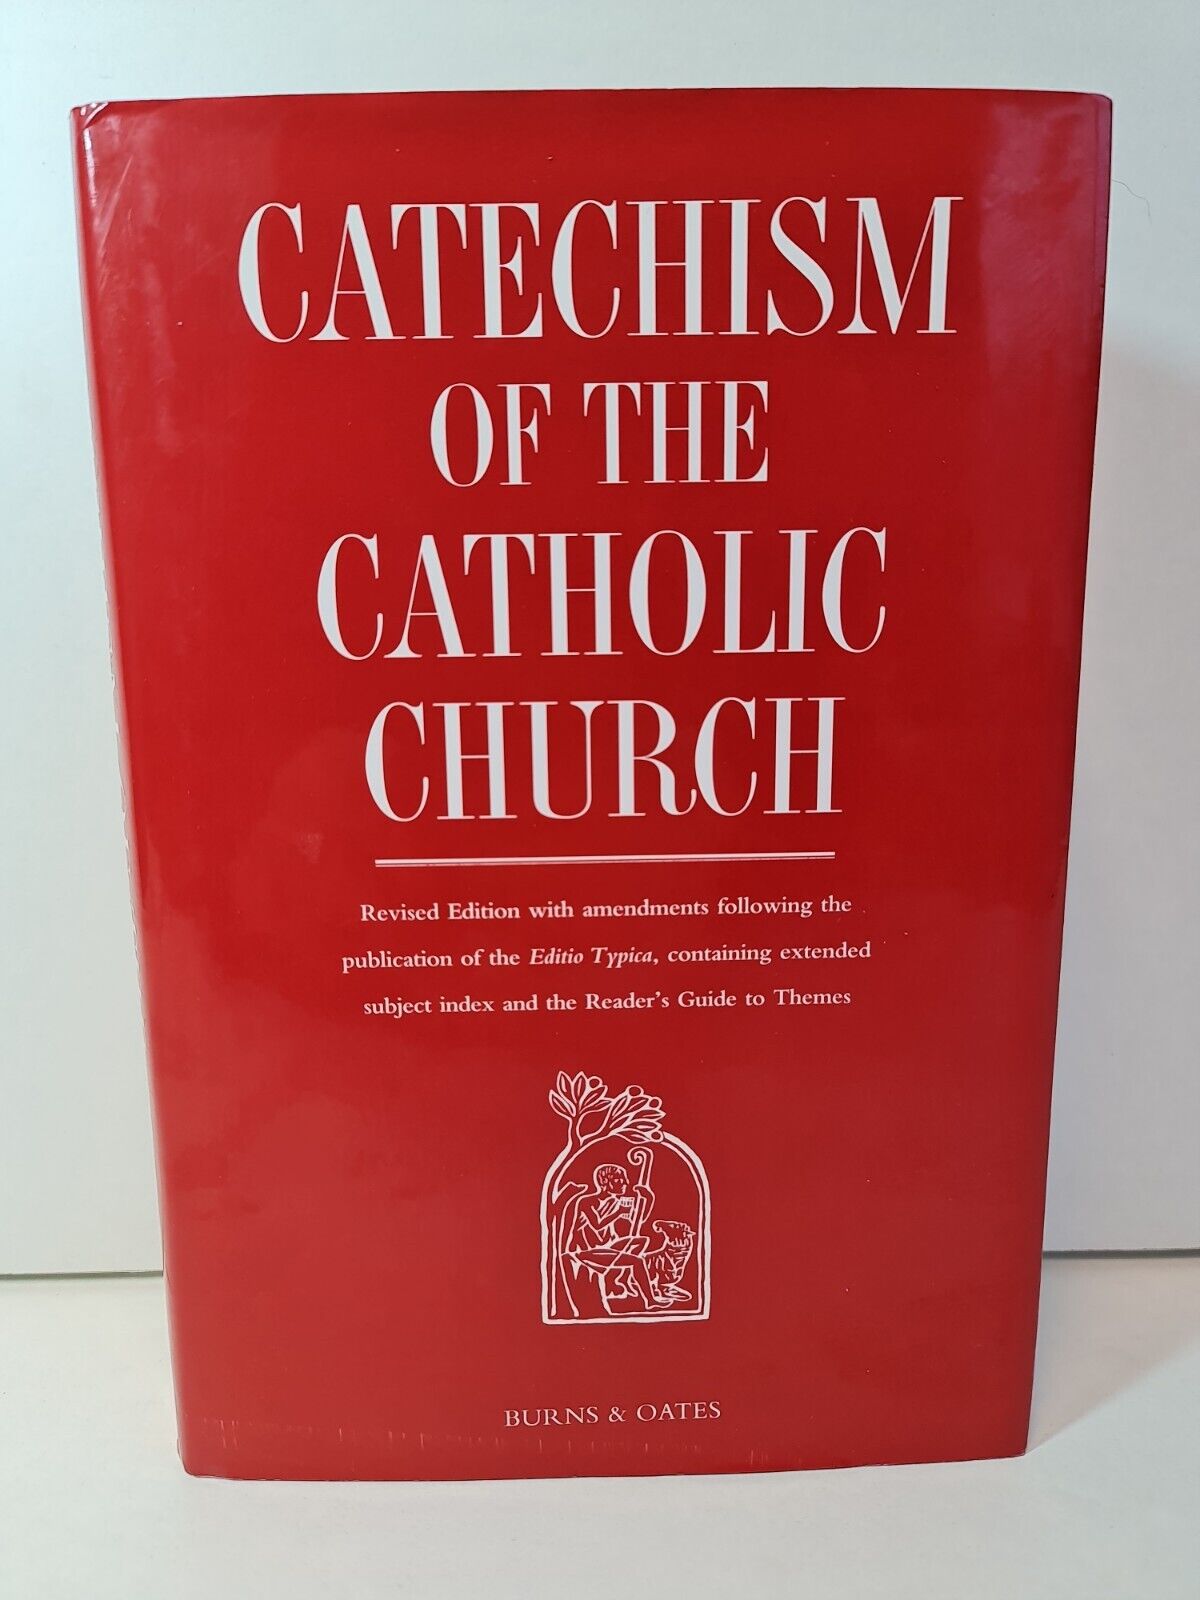 Catechism of the Catholic Church by The Vatican (2004)